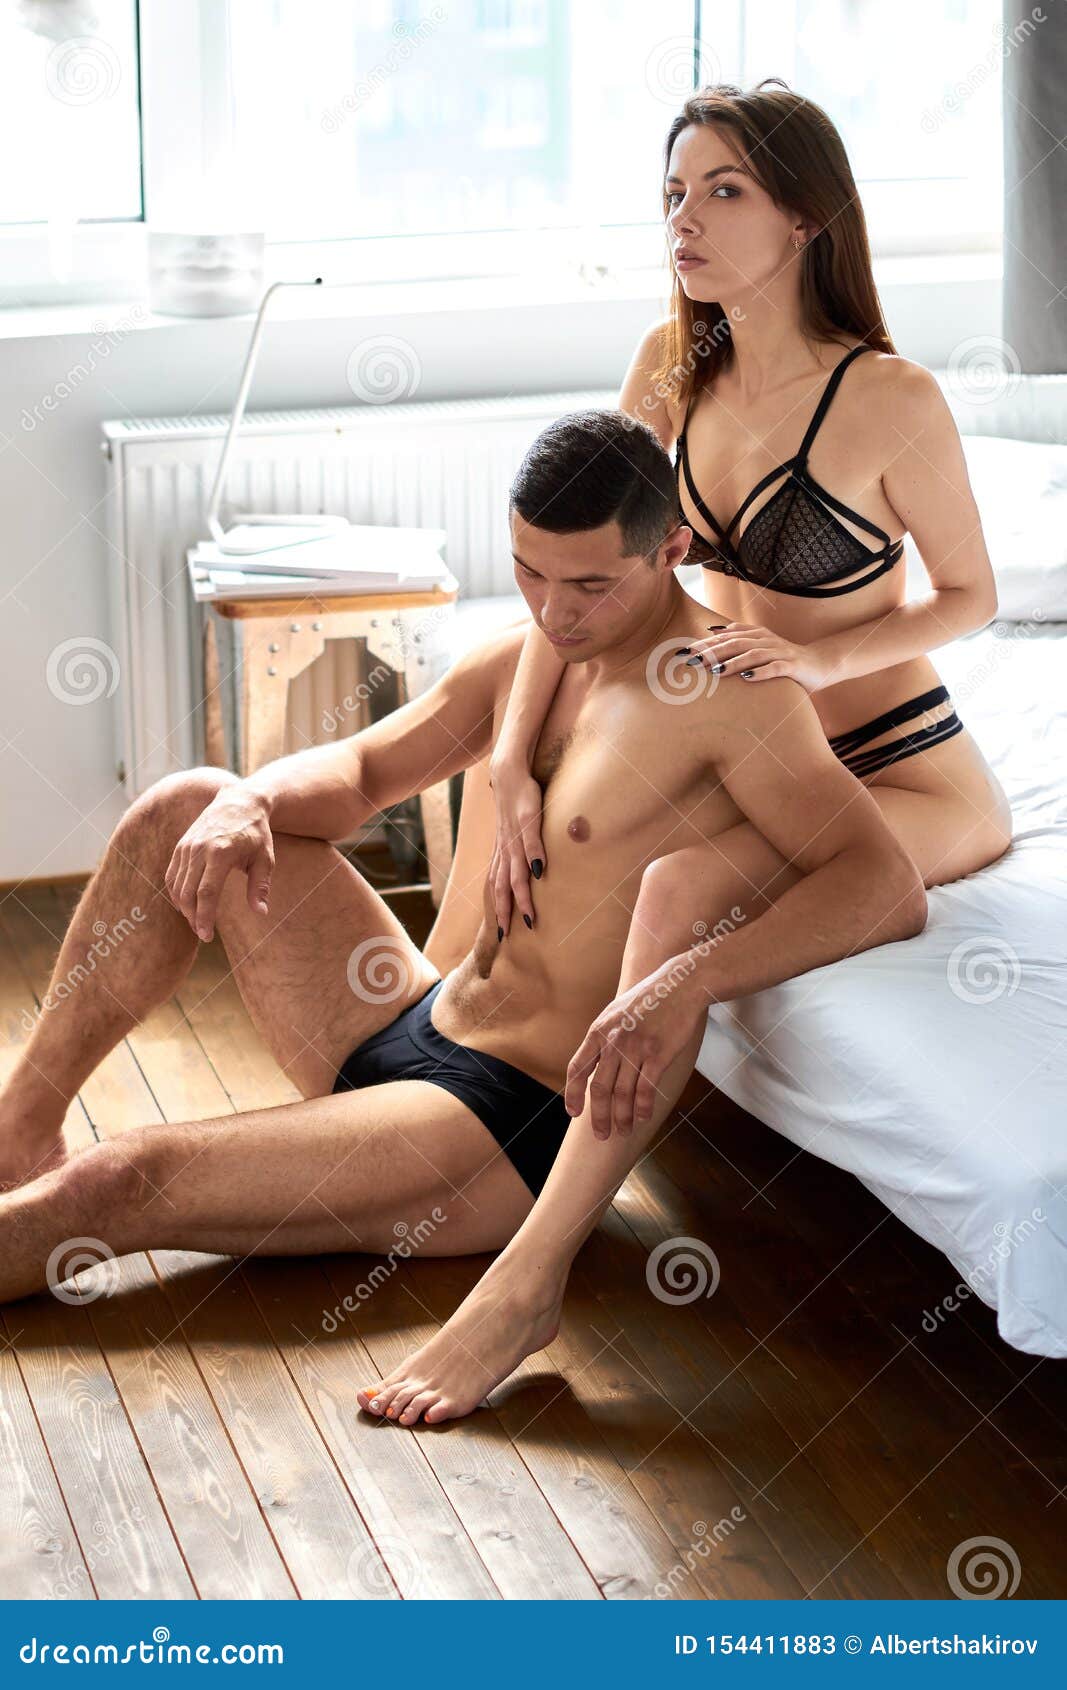 Woman in Stylish Lingerie Trying To Support Her Husband As he Has